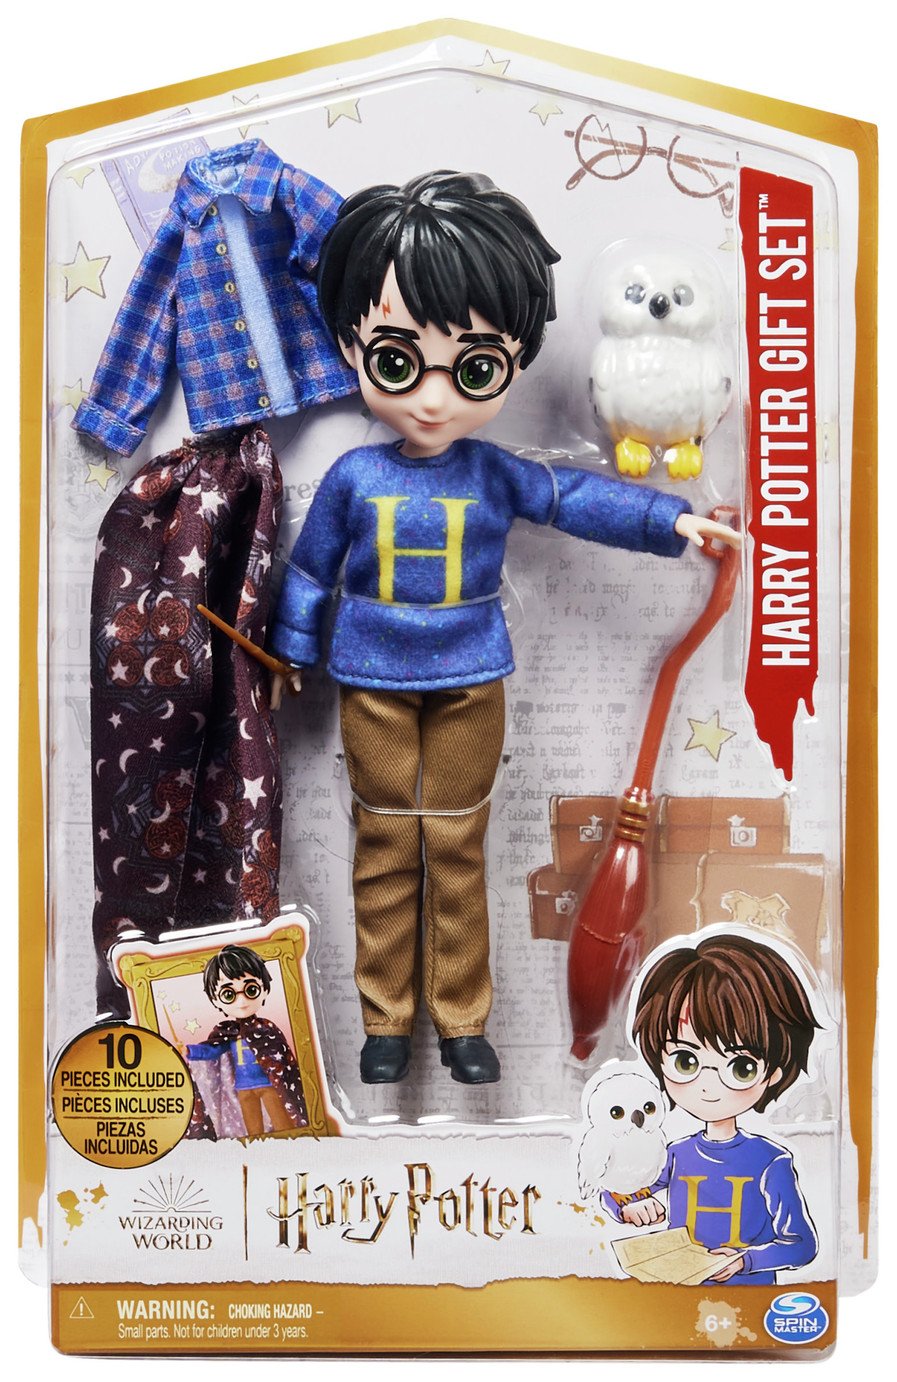 Harry Potter Deluxe Fashion Doll Set -8inch/20cm